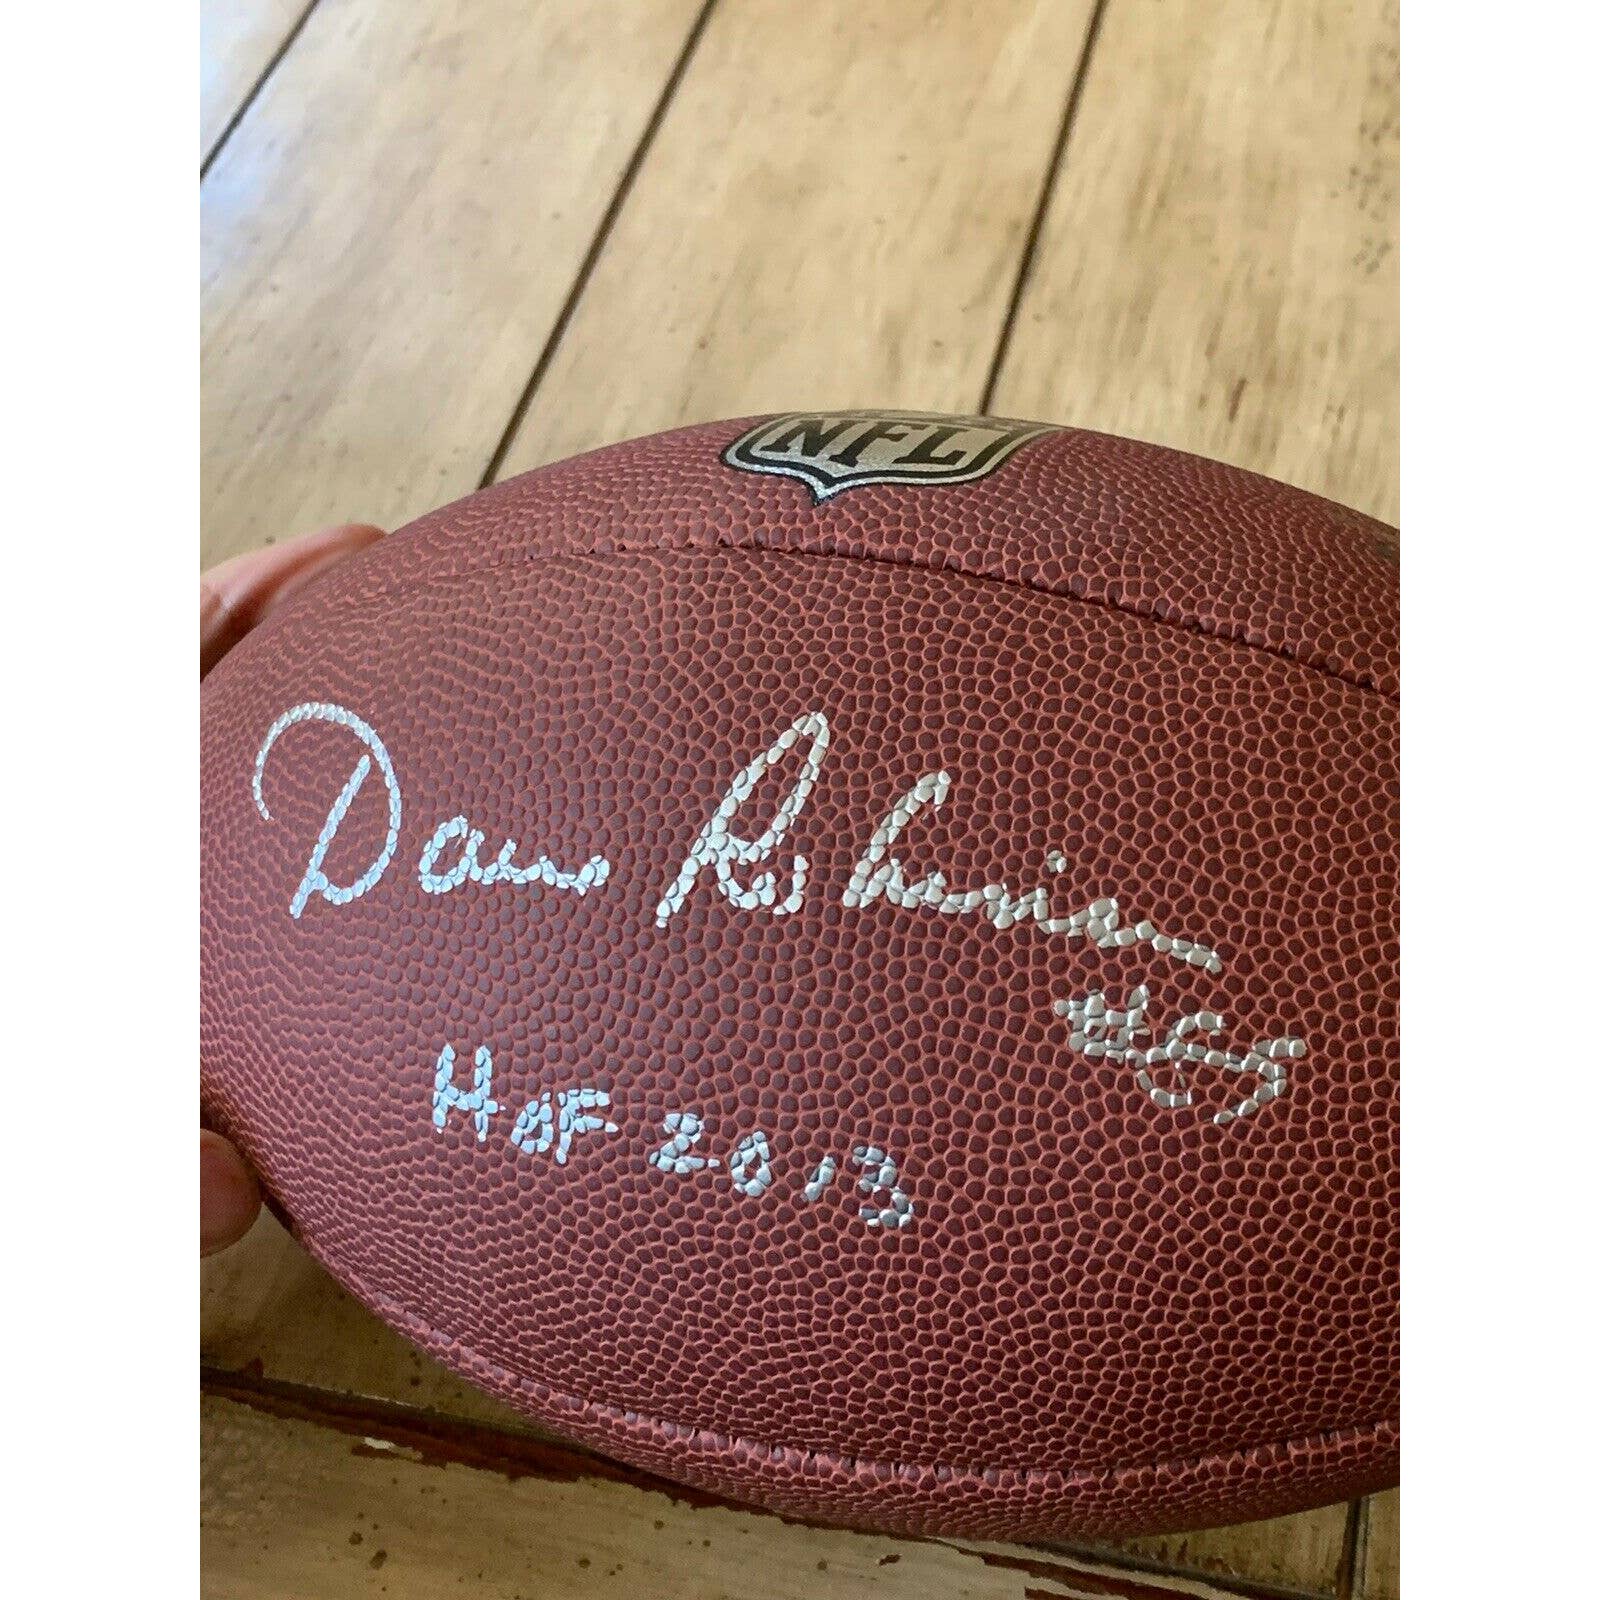 Dave Robinson Autographed/Signed Football Schwartz COA Green Bay Packers - TreasuresEvolved